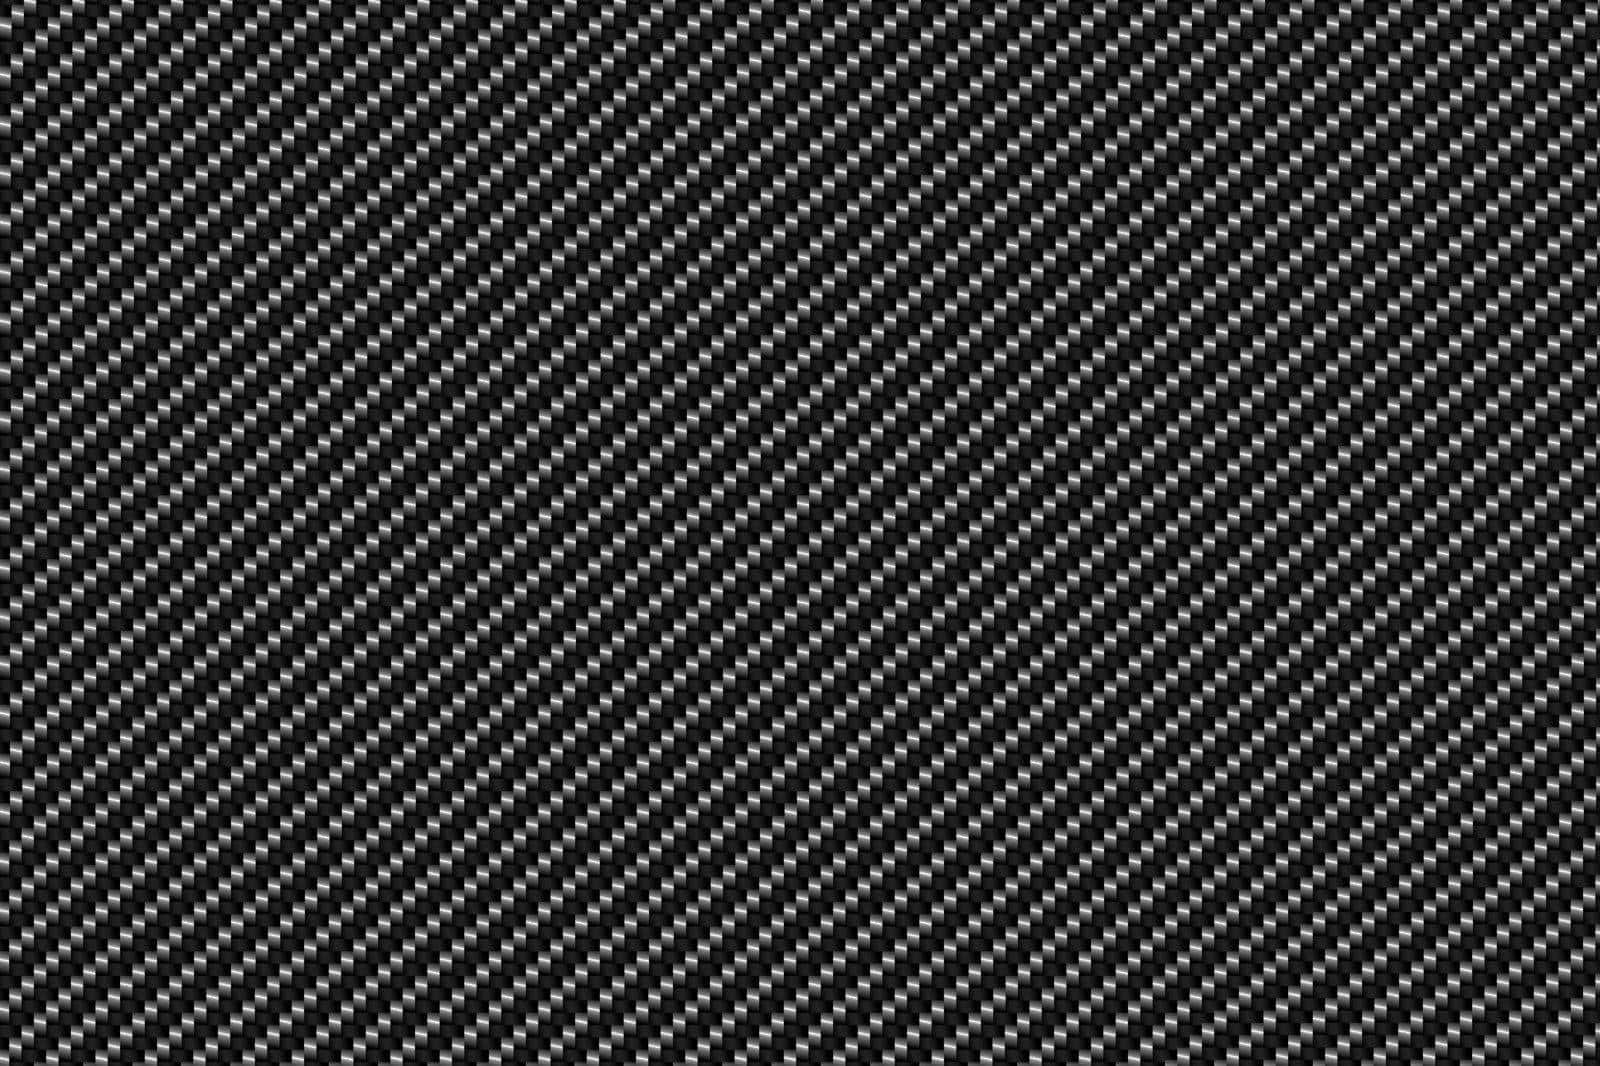 Add an edgy and modern touch to any space with Black Carbon Fiber Wallpaper